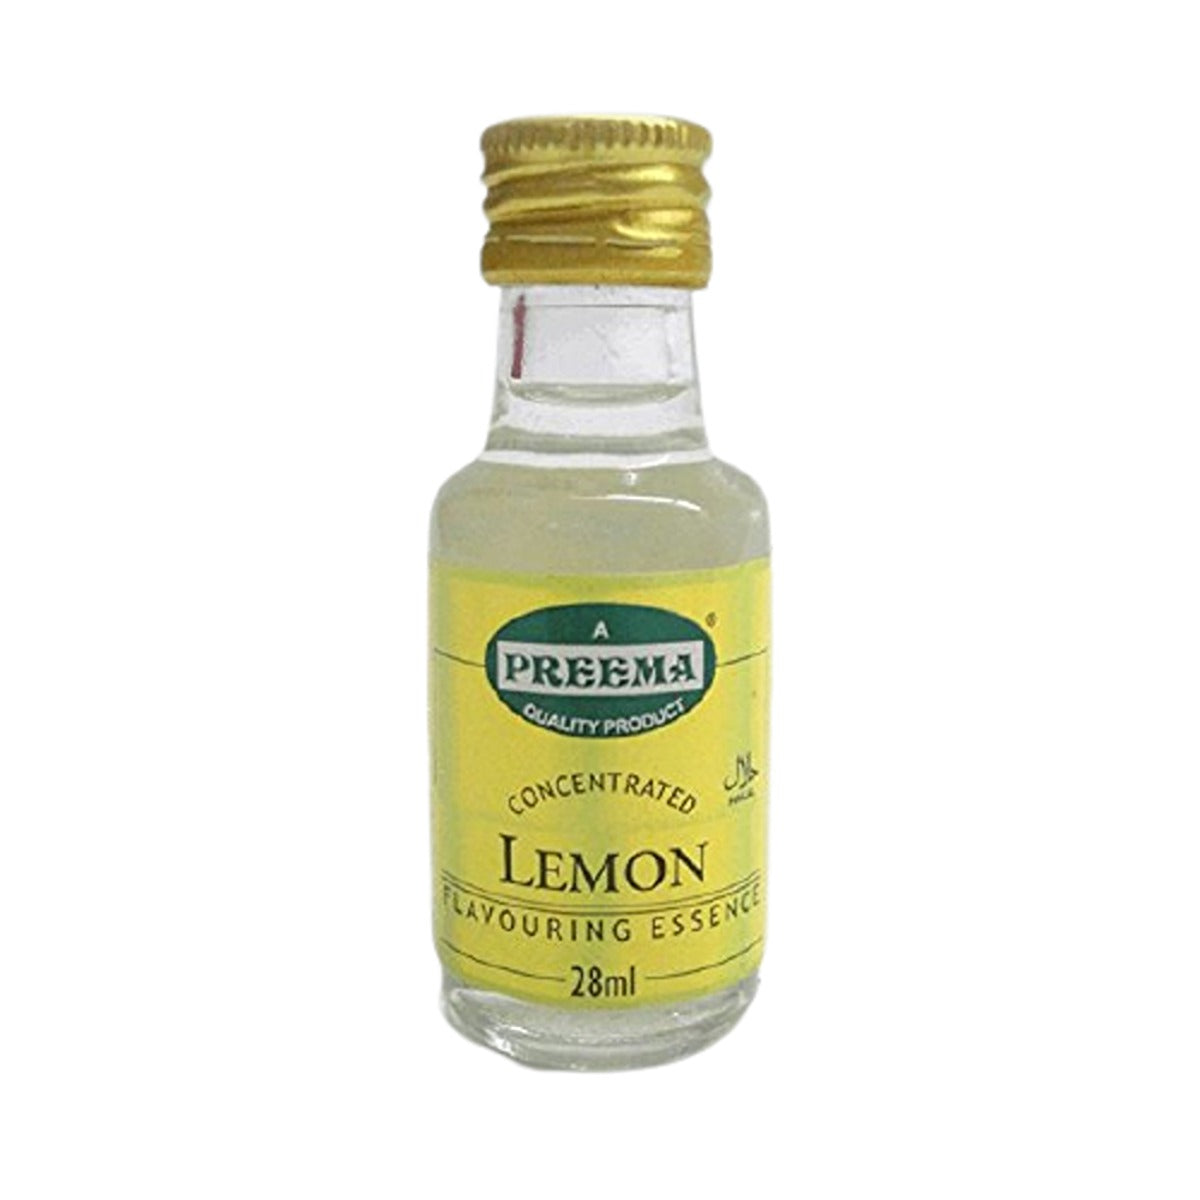 A bottle of Preema - Food Lemon Flavouring Essence 28ml on a white background.